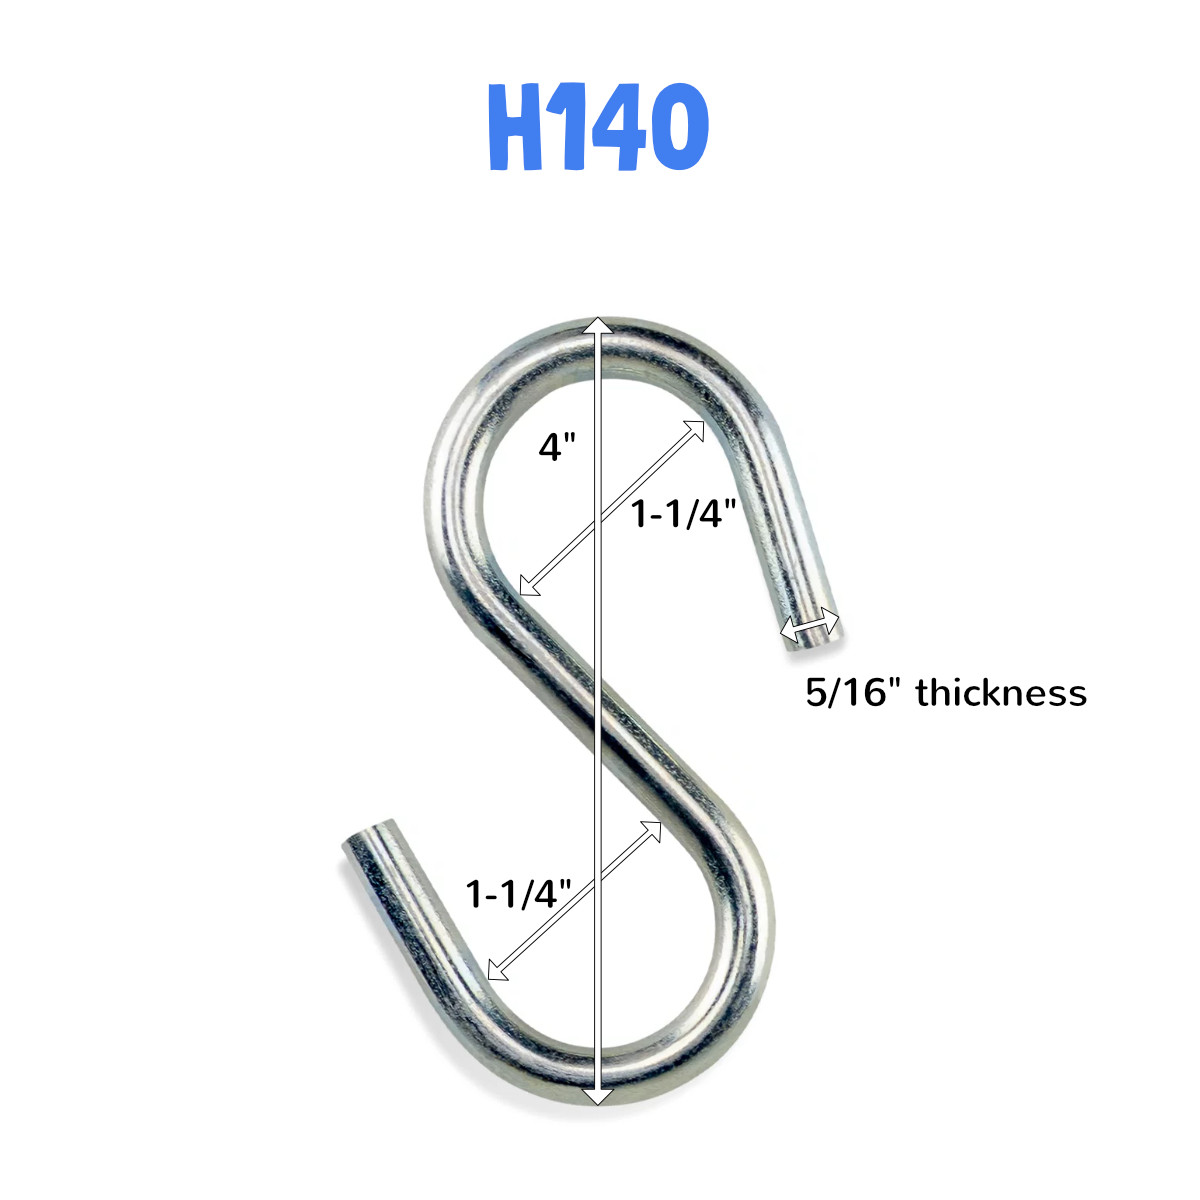 S-Hook - Commercial - S140